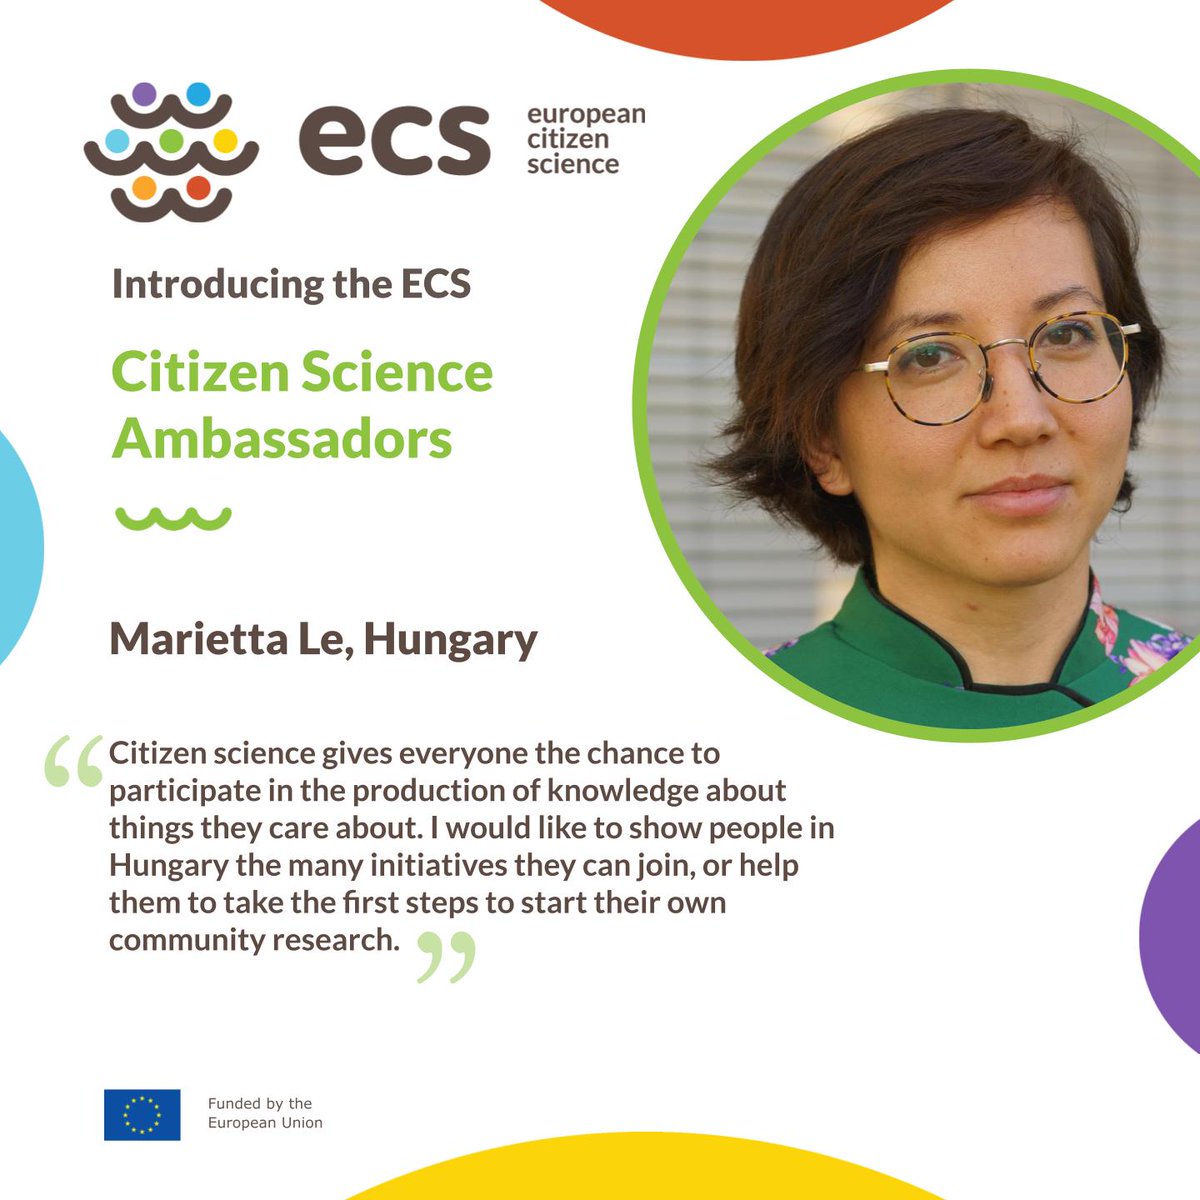 ➊➎ ECS #CitizenScience Ambassador from #Hungary: Marietta will help people to take the first steps to start their own community research. She has joined the group of ECS ambassadors to foster #CitizenScience in her country.
@lemarietta 
@EU_Commission 
@REA_research